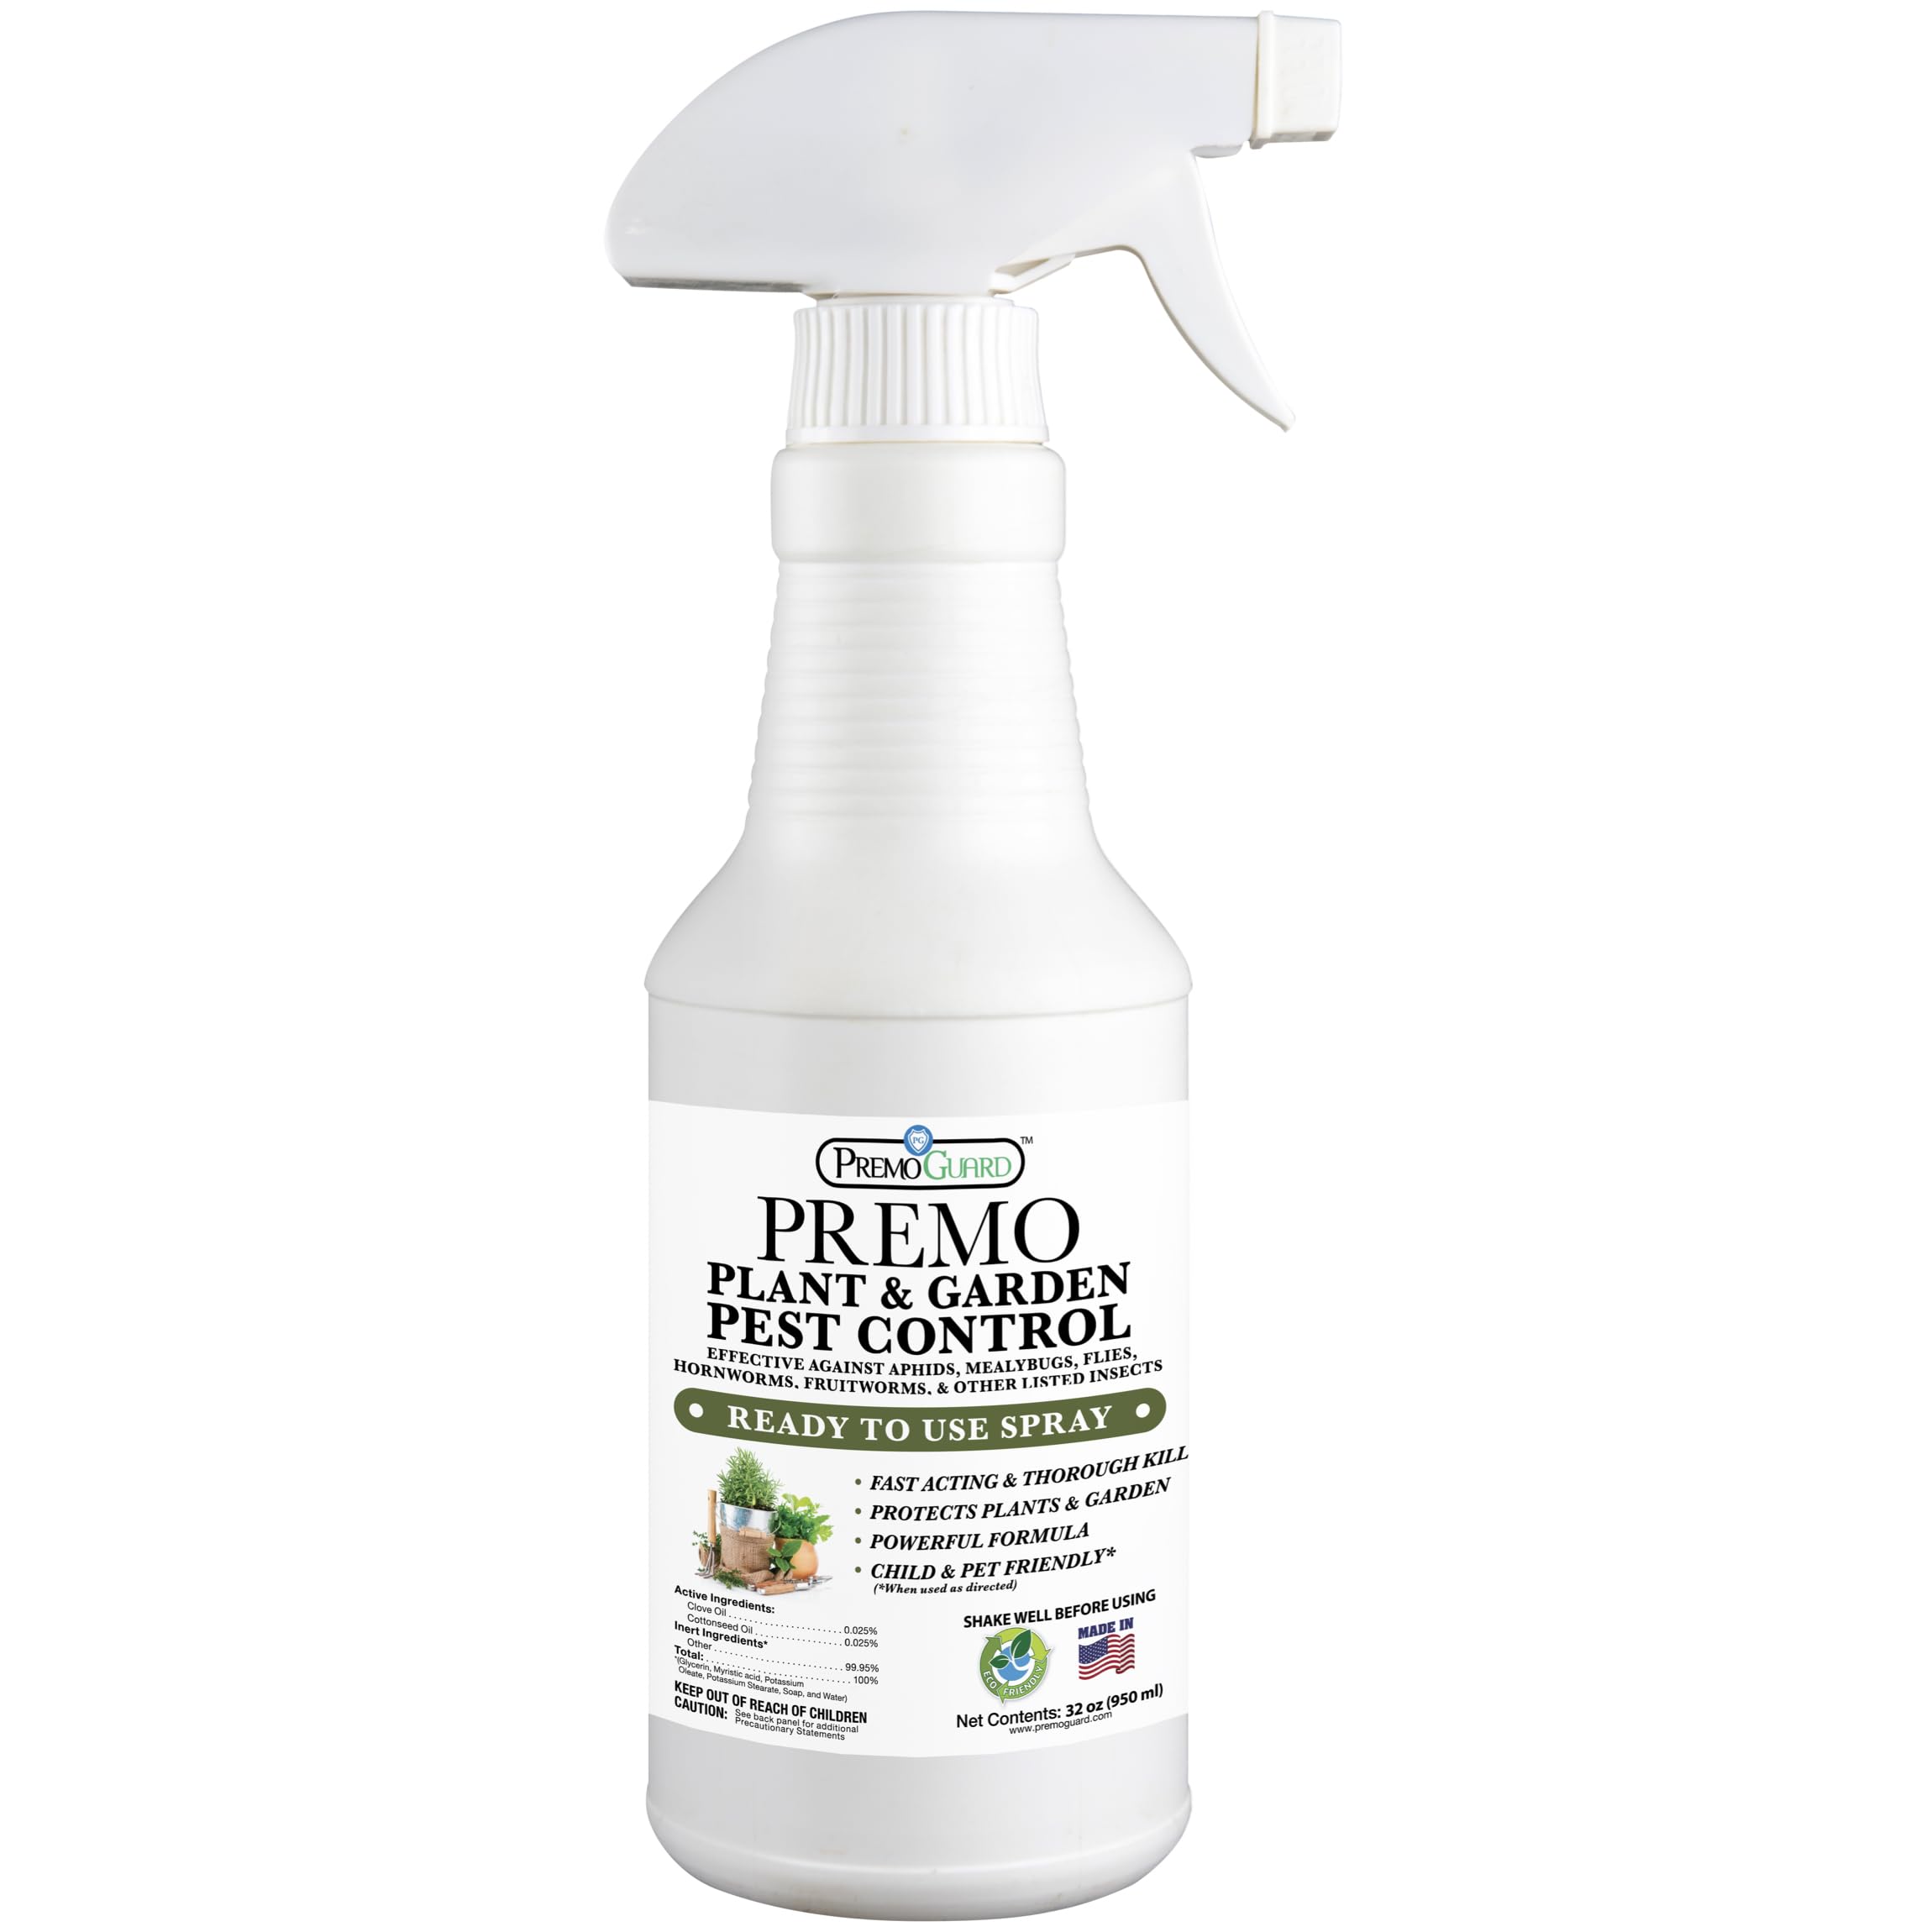 Plant and Garden Pest Control Spray by Premo Guard